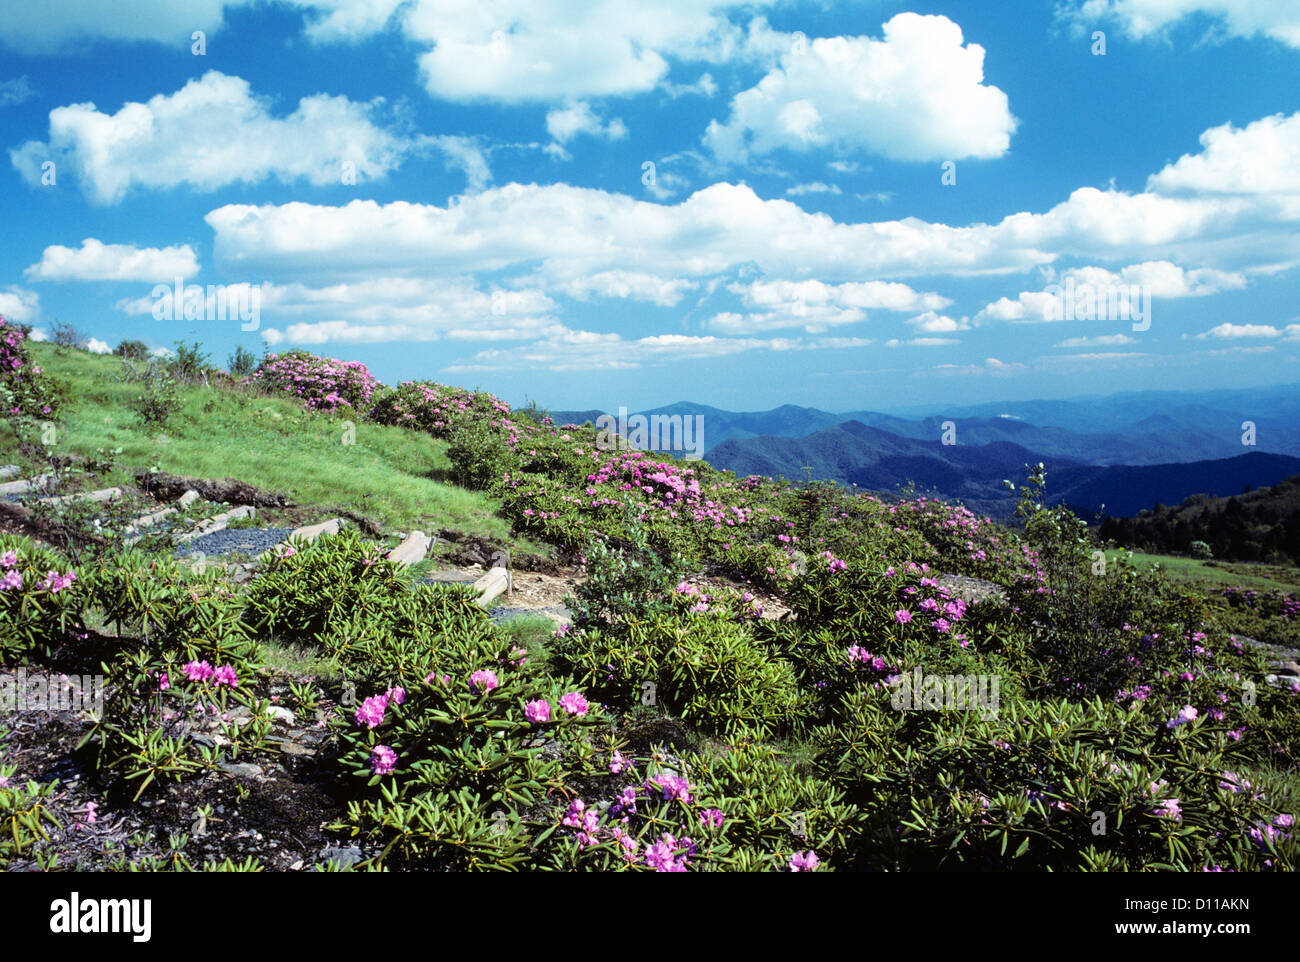 Rhododendrons On Roan Mountain Tennessee Stock Photo Alamy